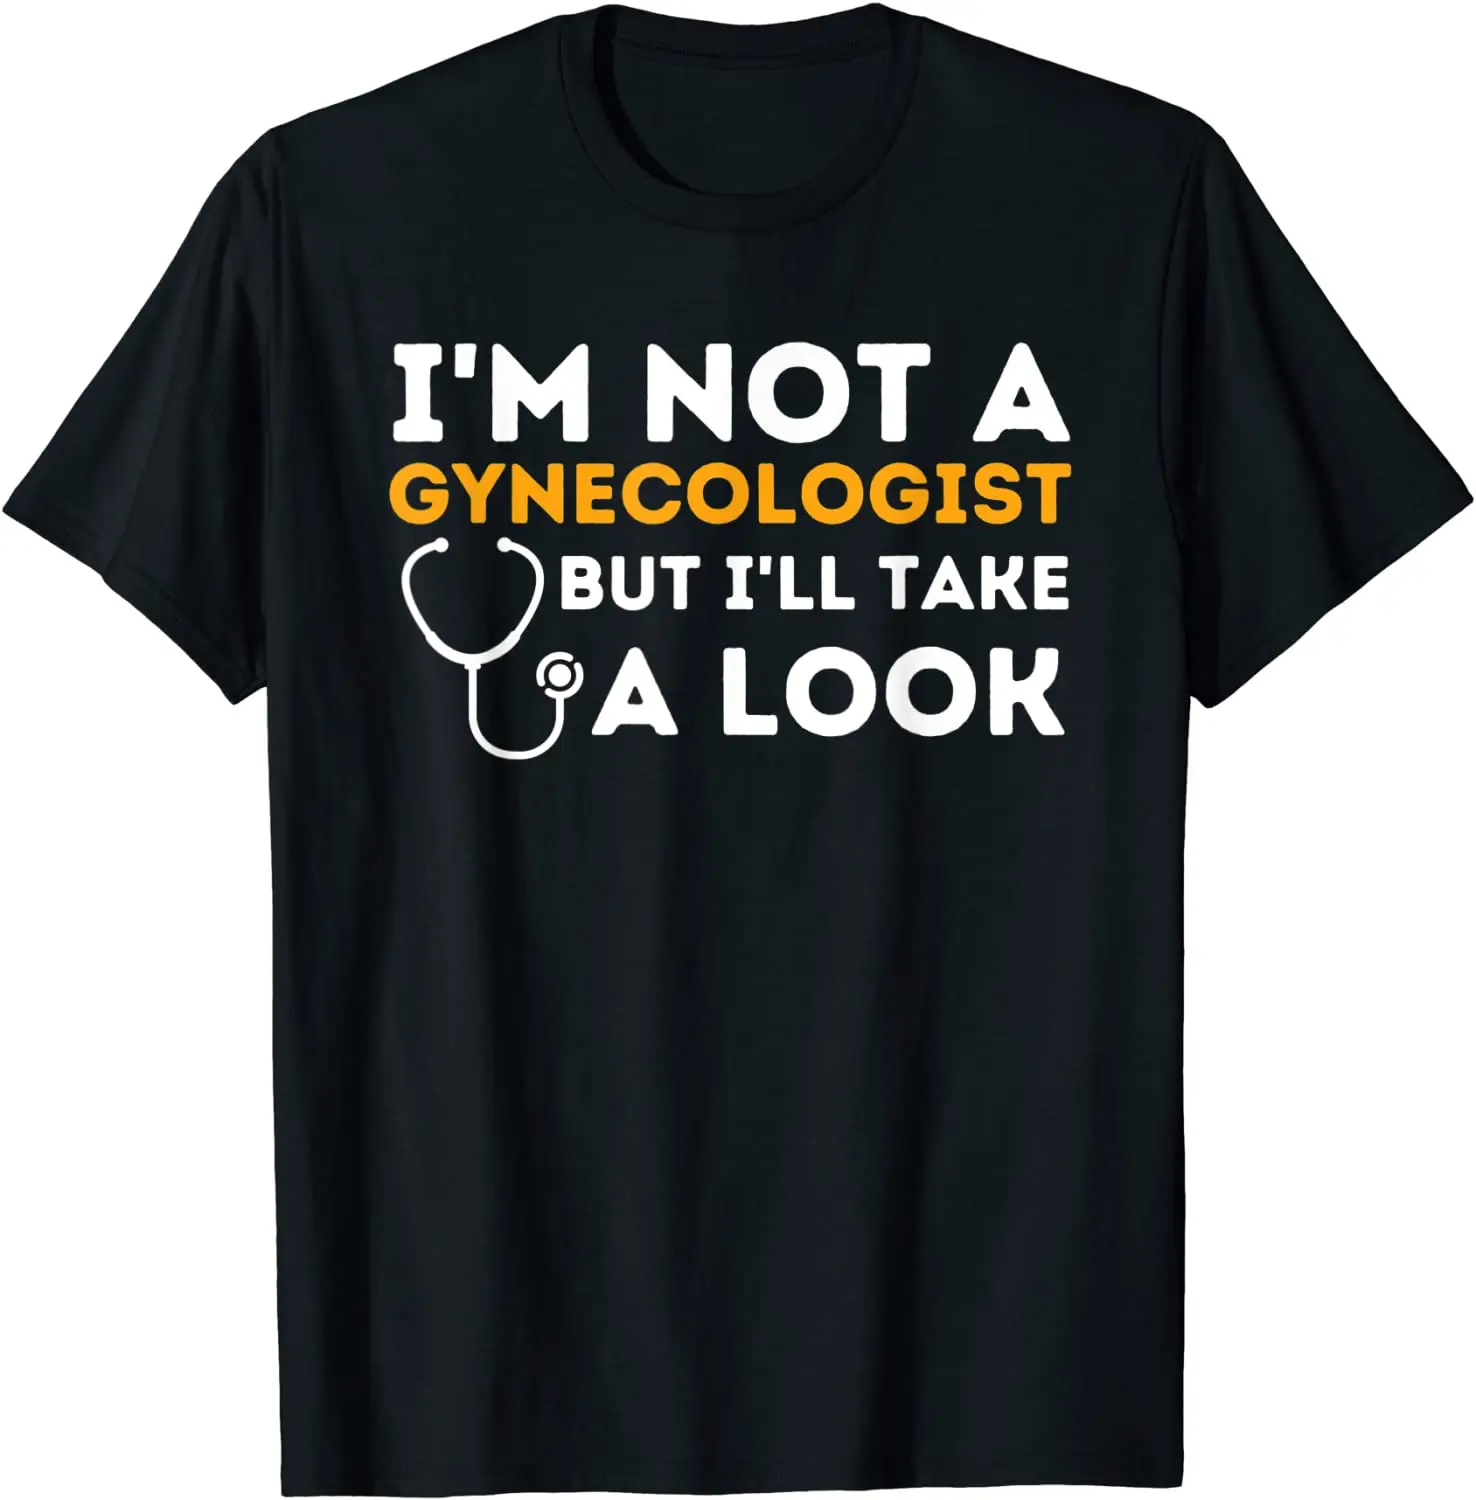 

2021 Summer Men's T-shirt I Am Not A Gynecologist But I Will Wear A High-quality Oversized T-shirt with A Letter Print Pattern